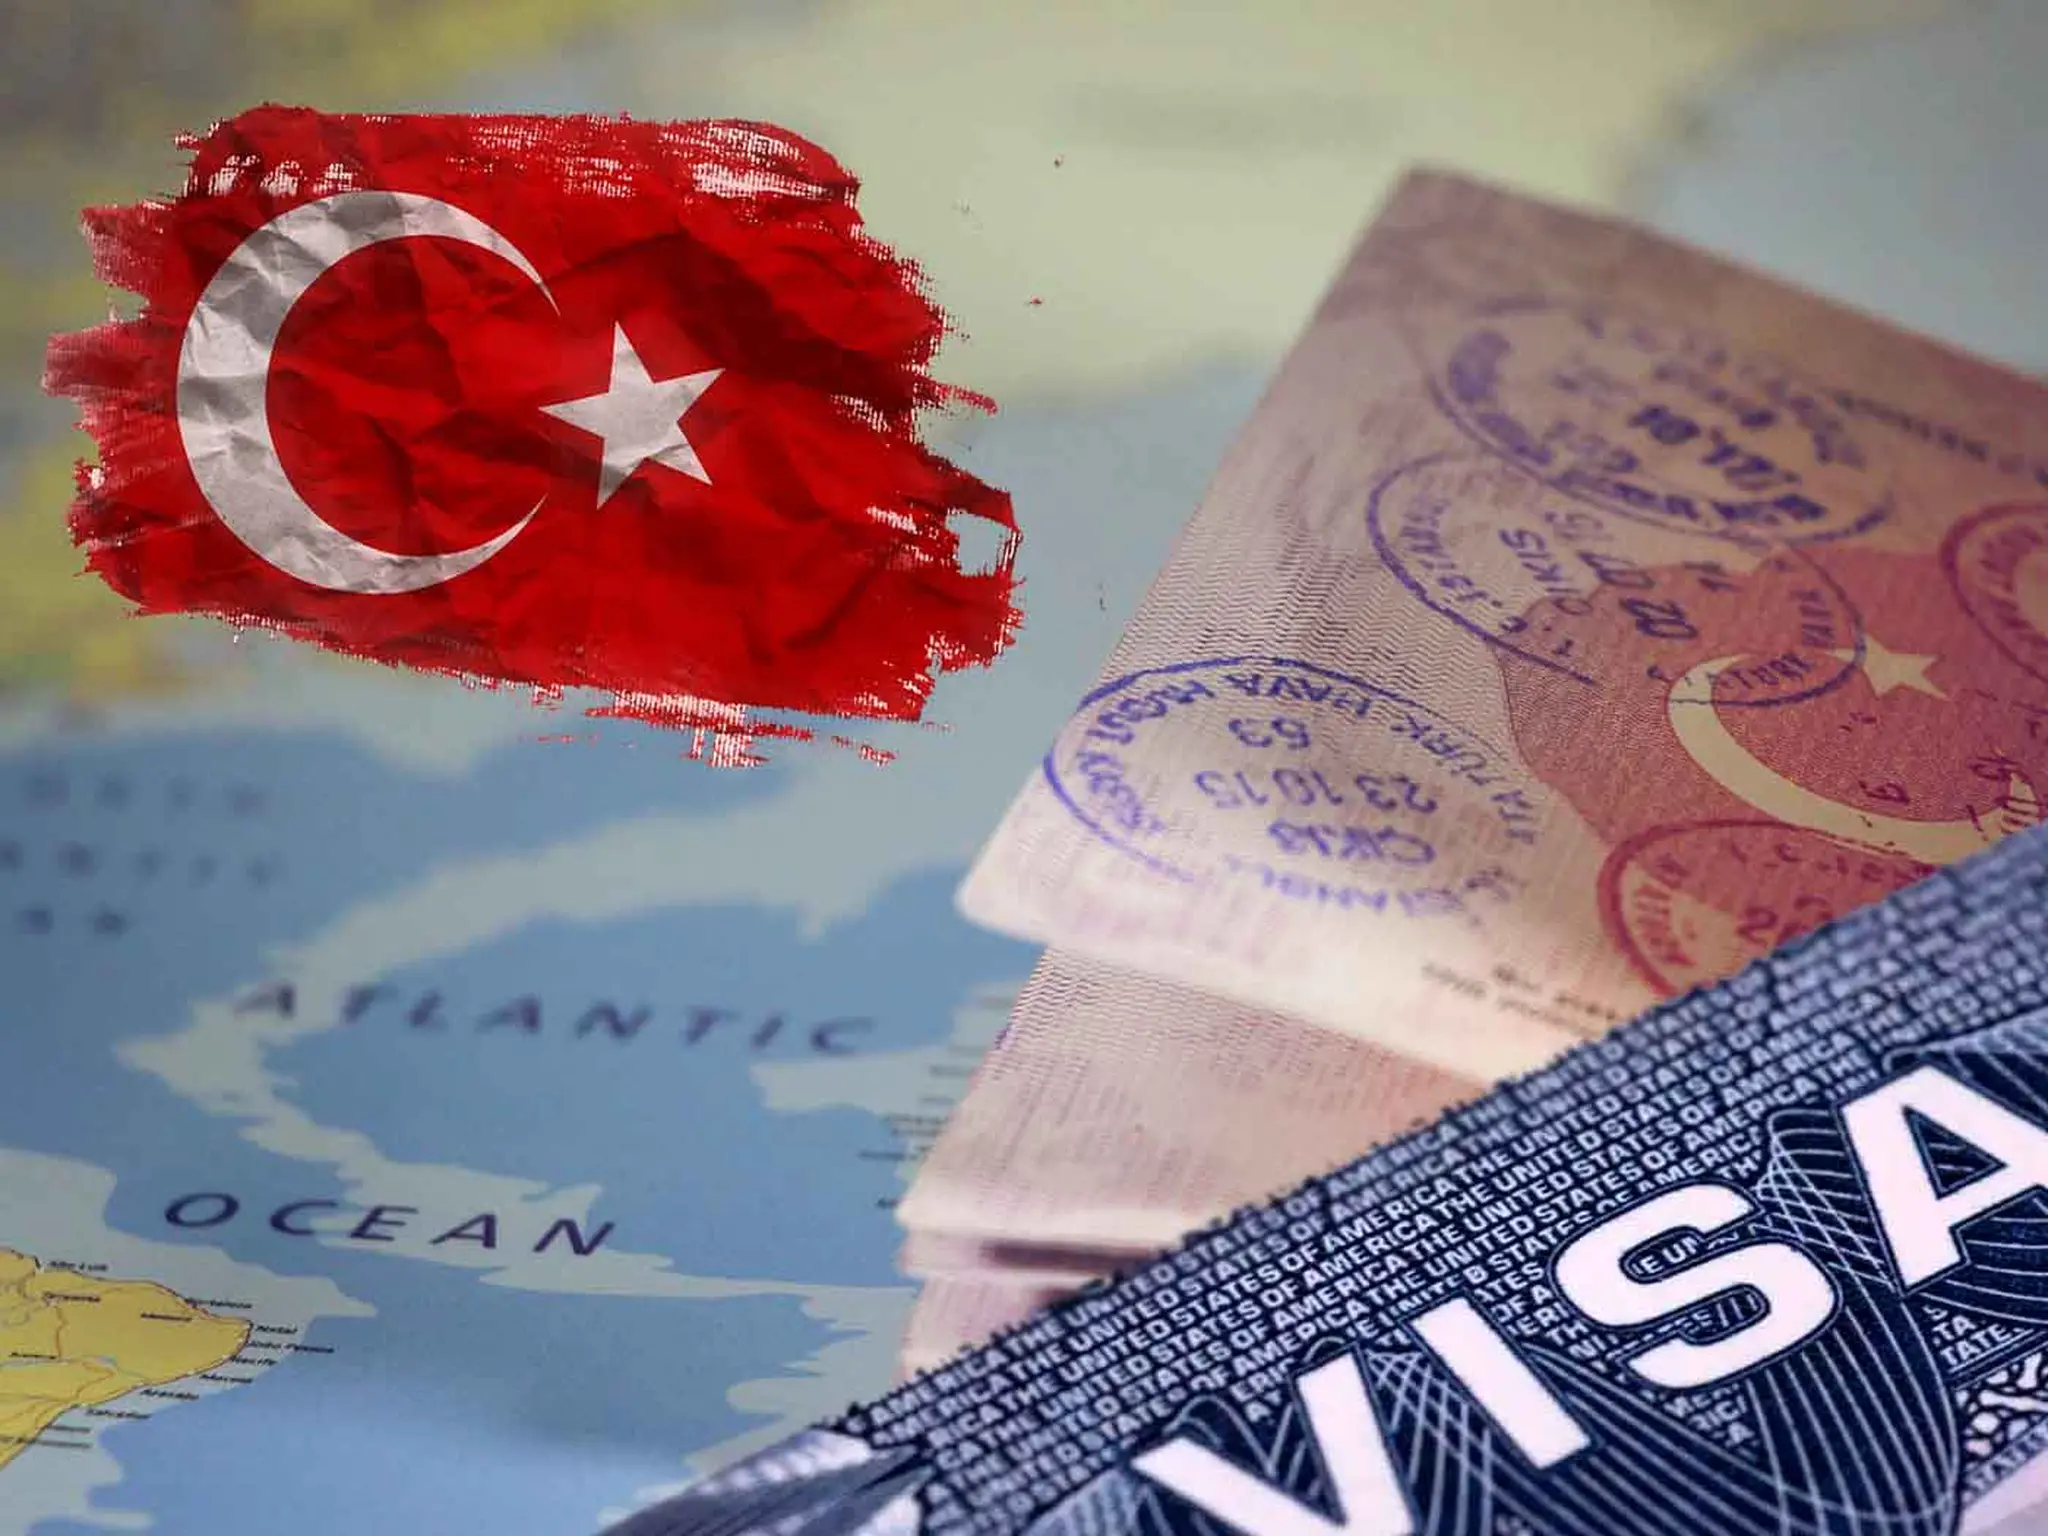 Türkiye announces visa exemption for holders of Canadian and American passports